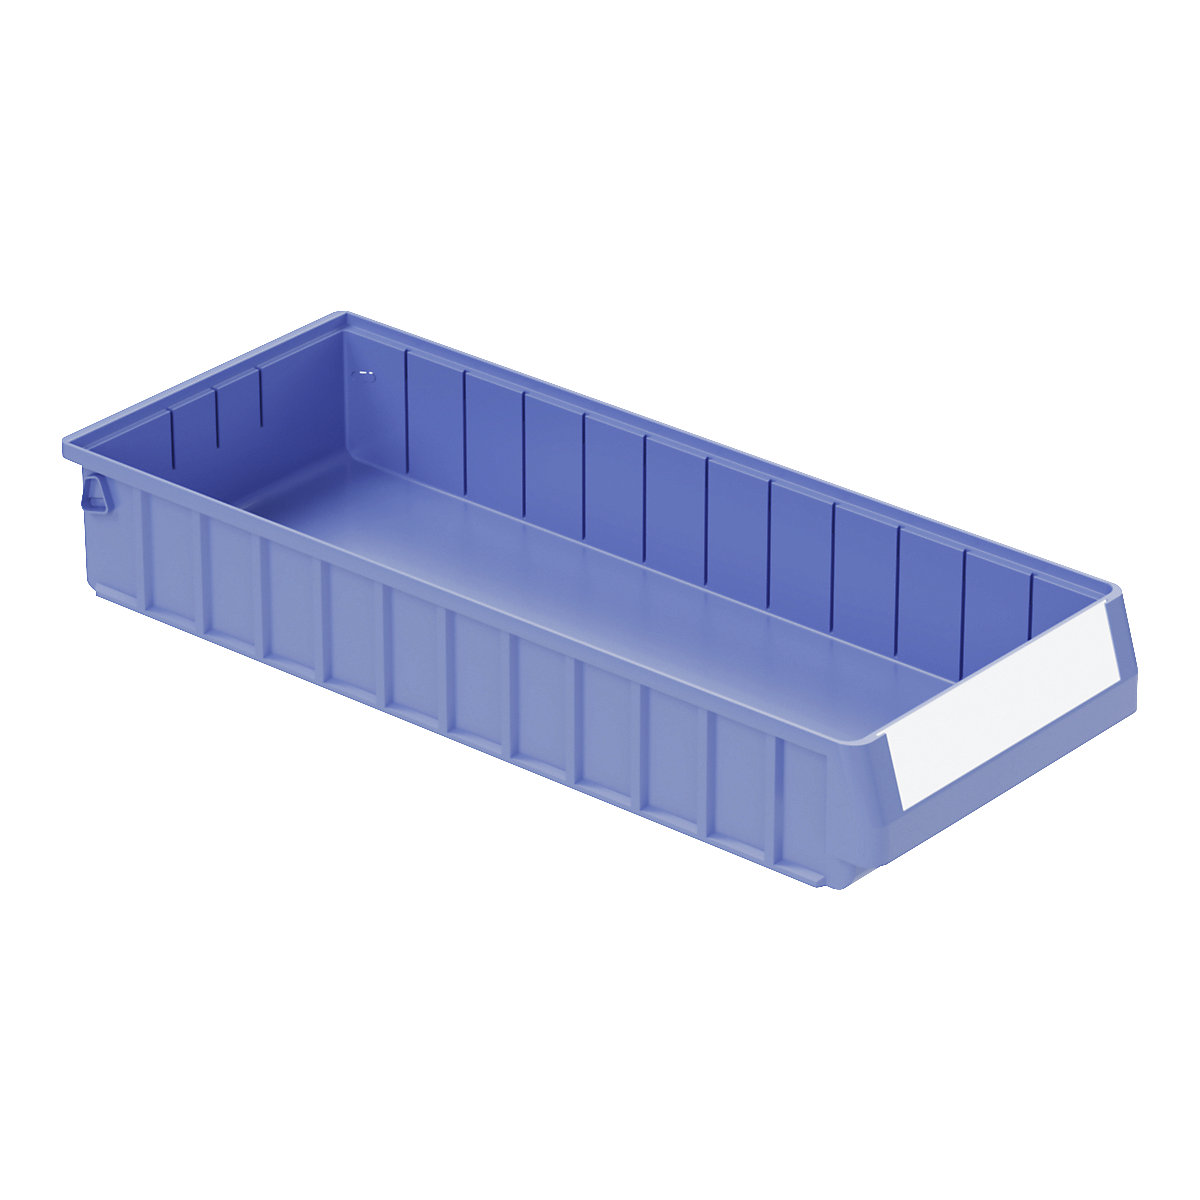 Shelf bin – BITO, made of PP, LxWxH 600 x 234 x 90 mm, pack of 8-11